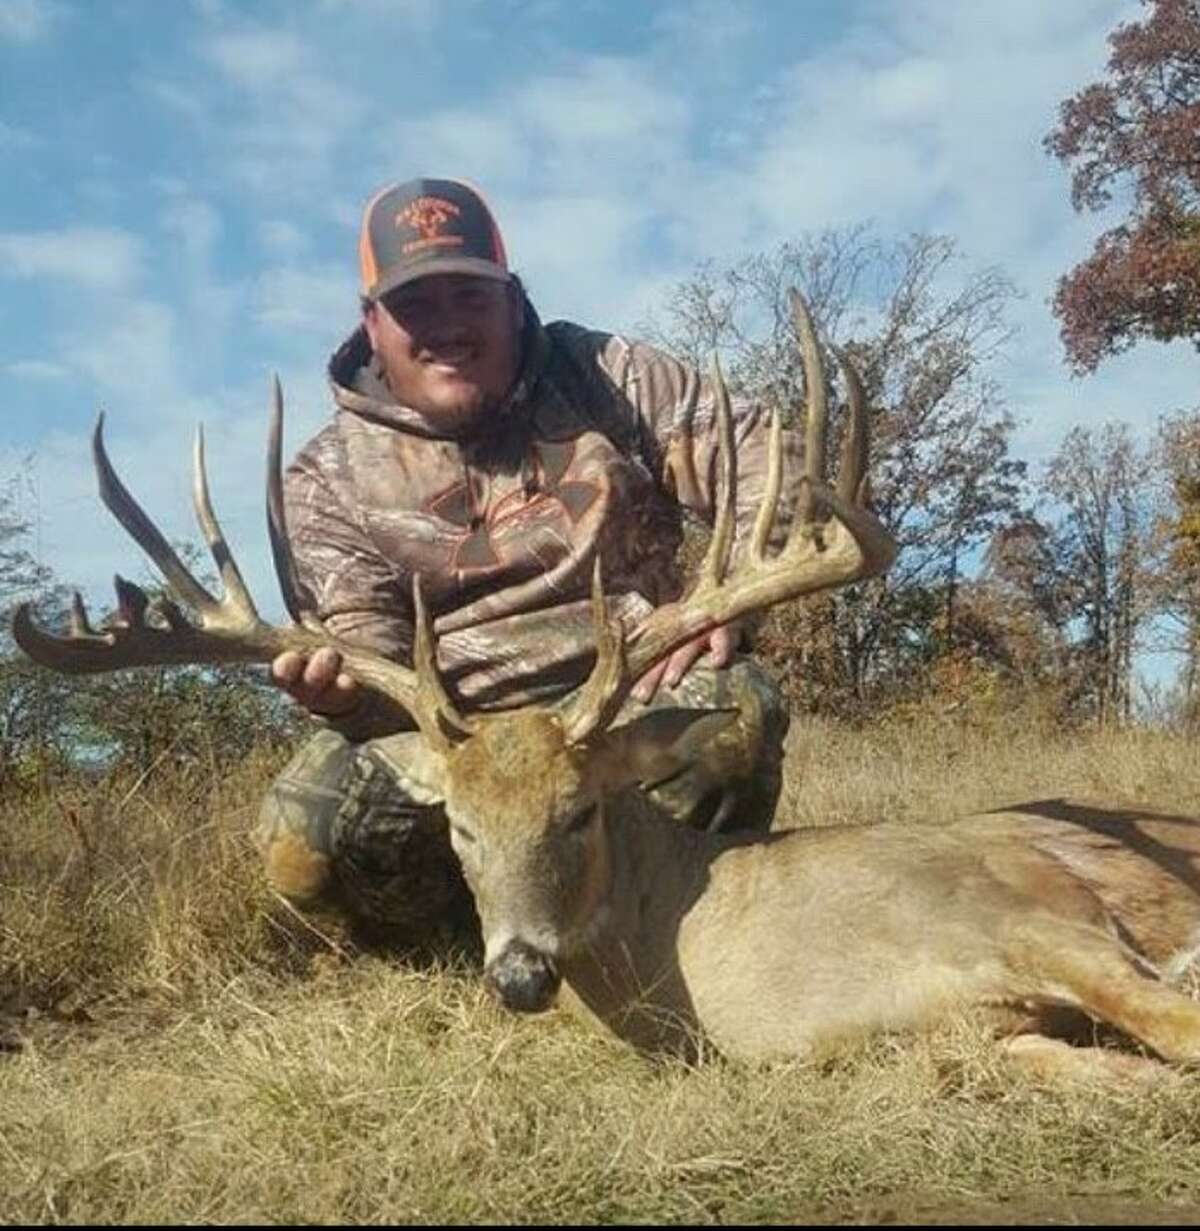 Texas whitetail poachers plead guilty to several charges after killing